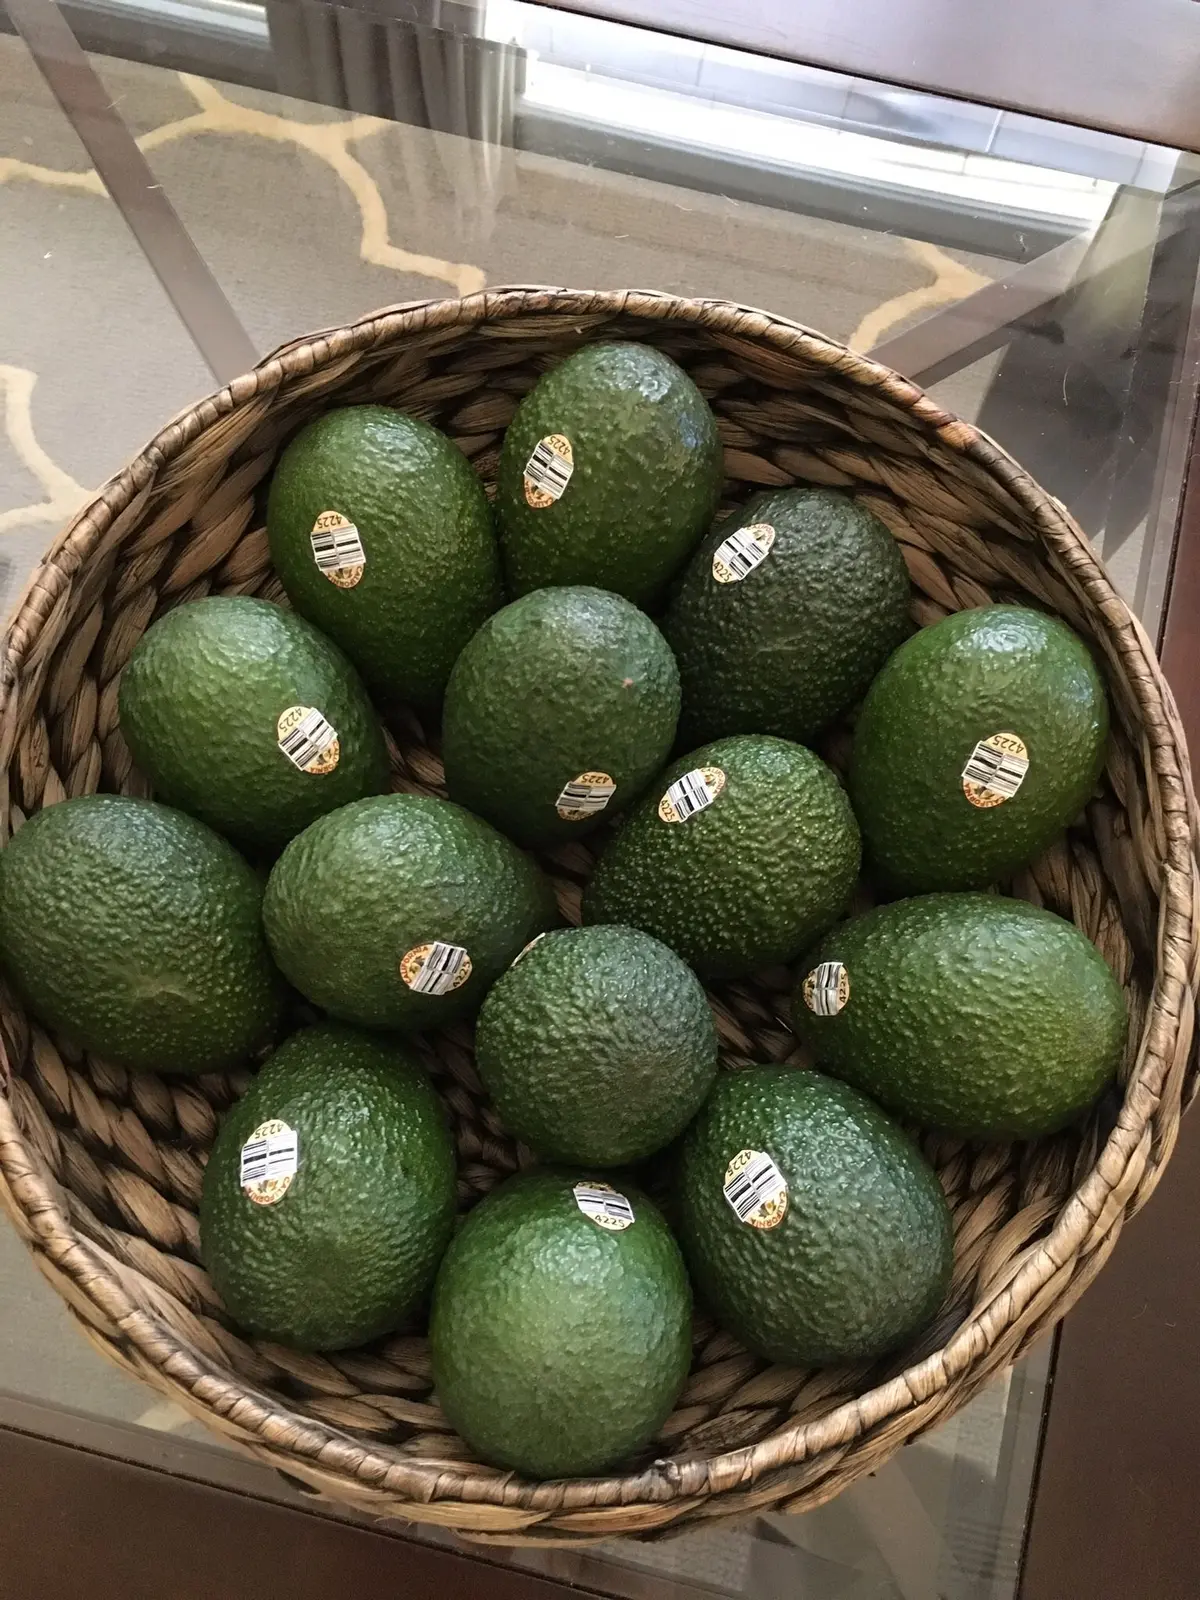 How to Store Avocados Properly and Safely